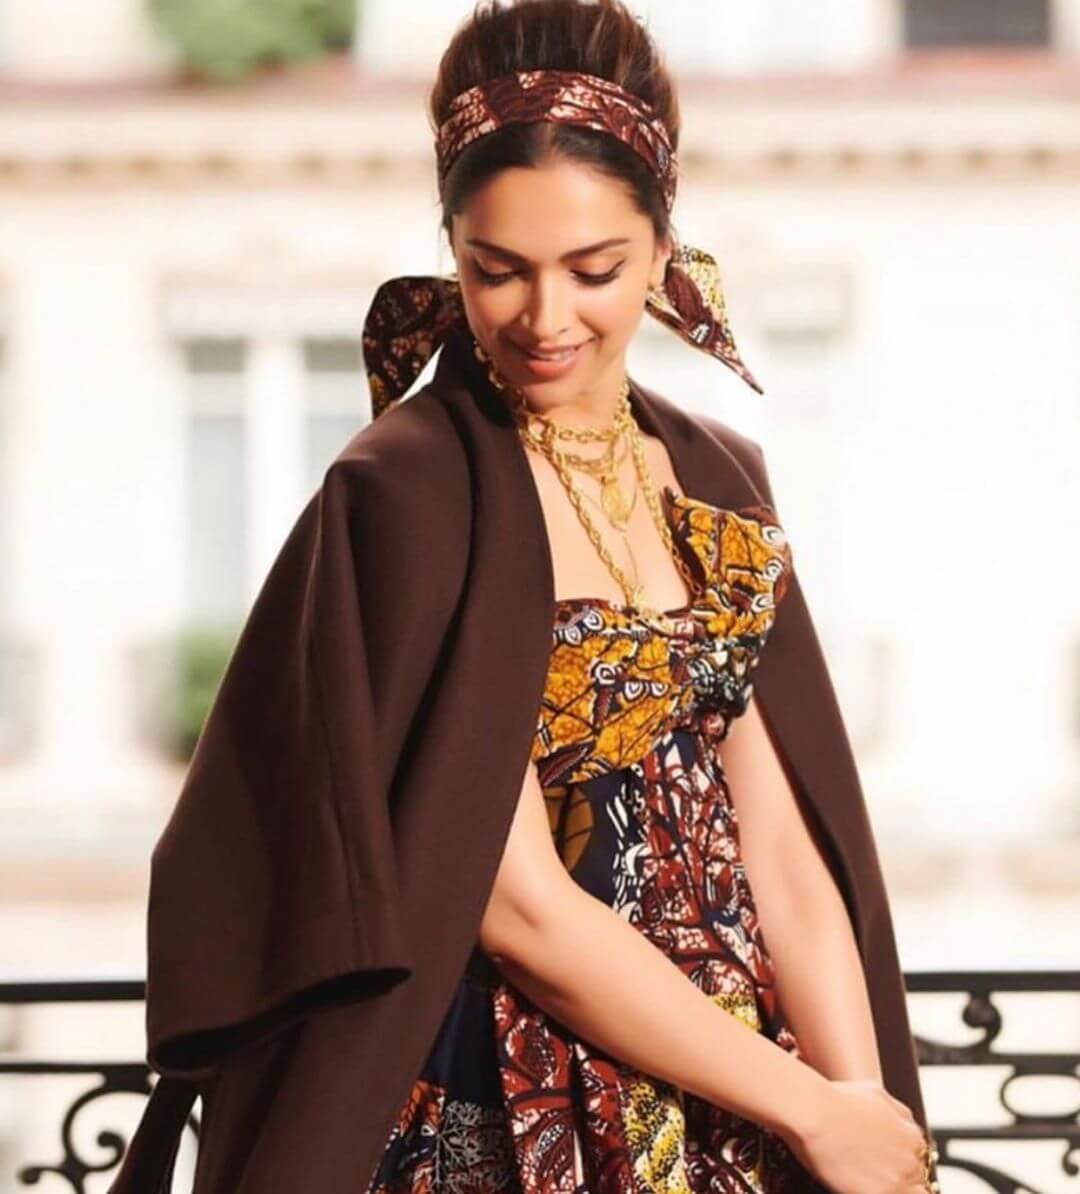  Deepika Padukone’s golden chain and a pendant with floral hairband.